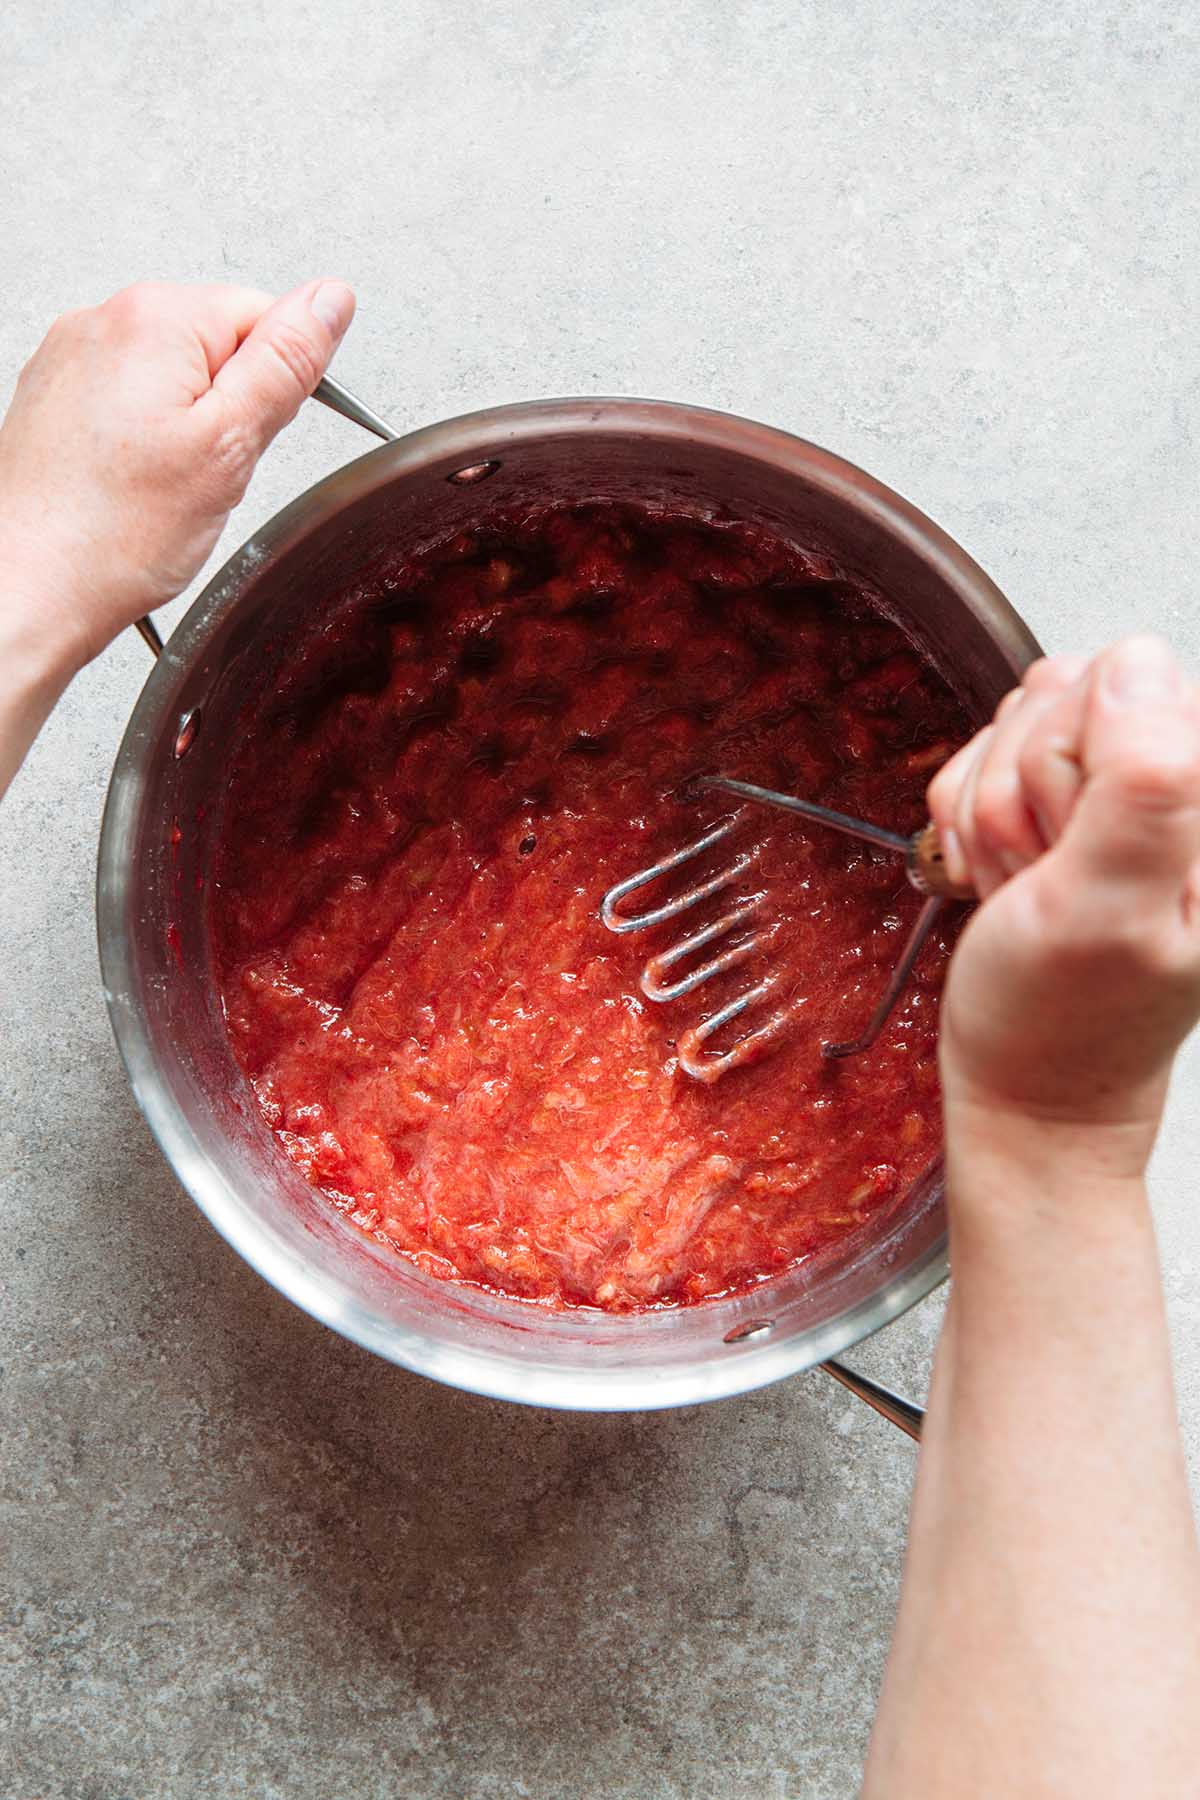 A hand crushing cooked rhubarb with a potato masher.